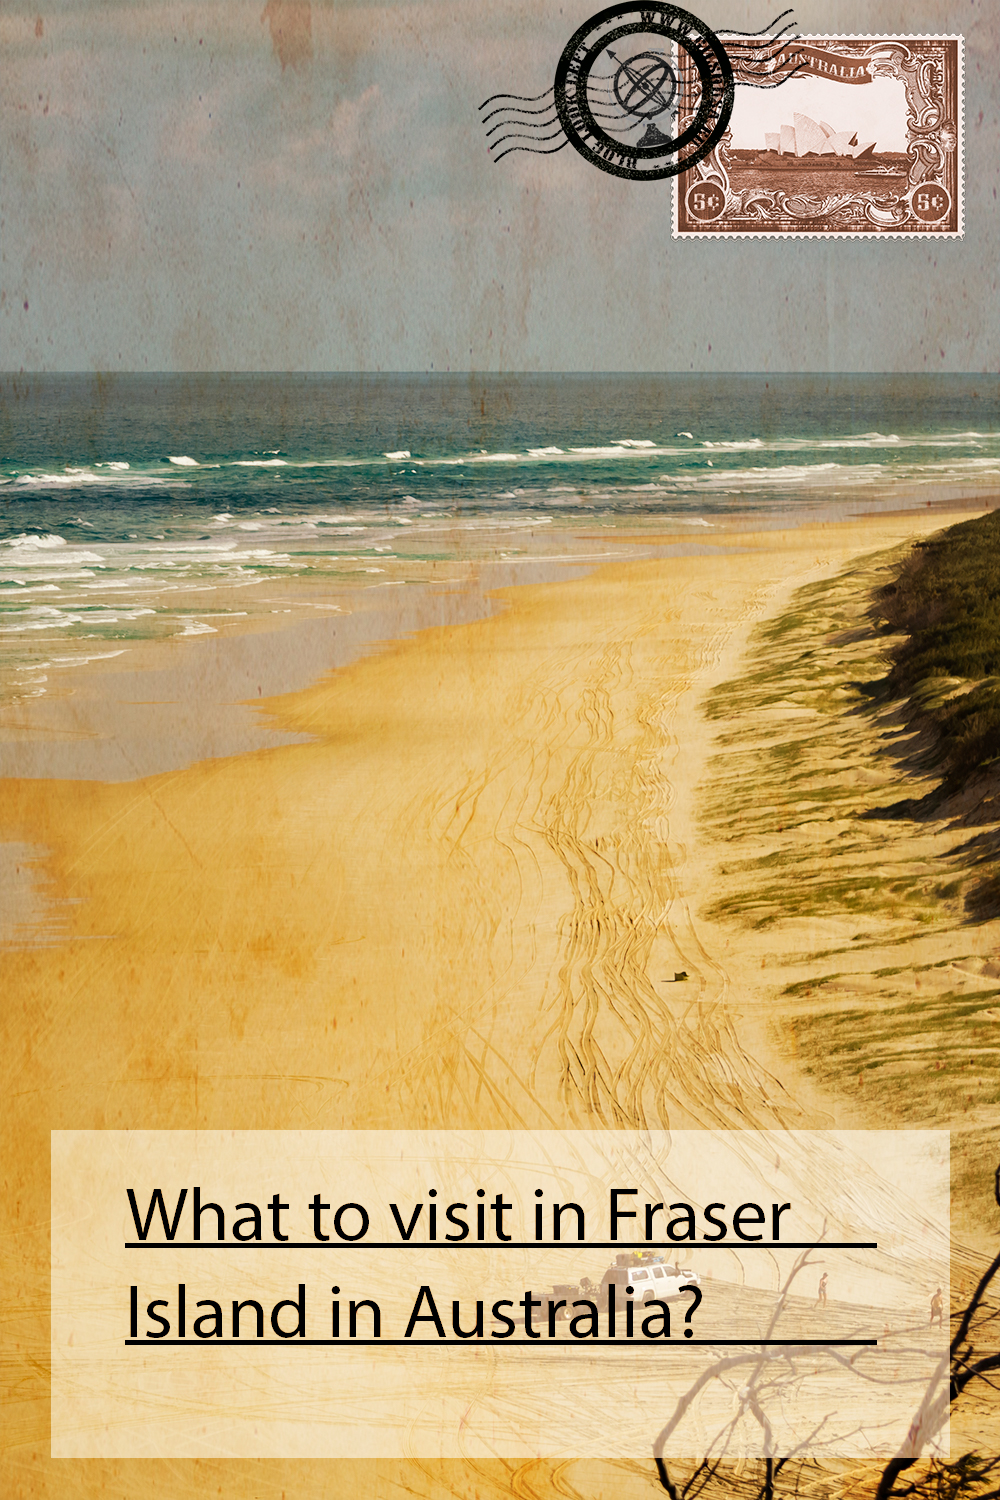 What to visit in Fraser Island in Australia?